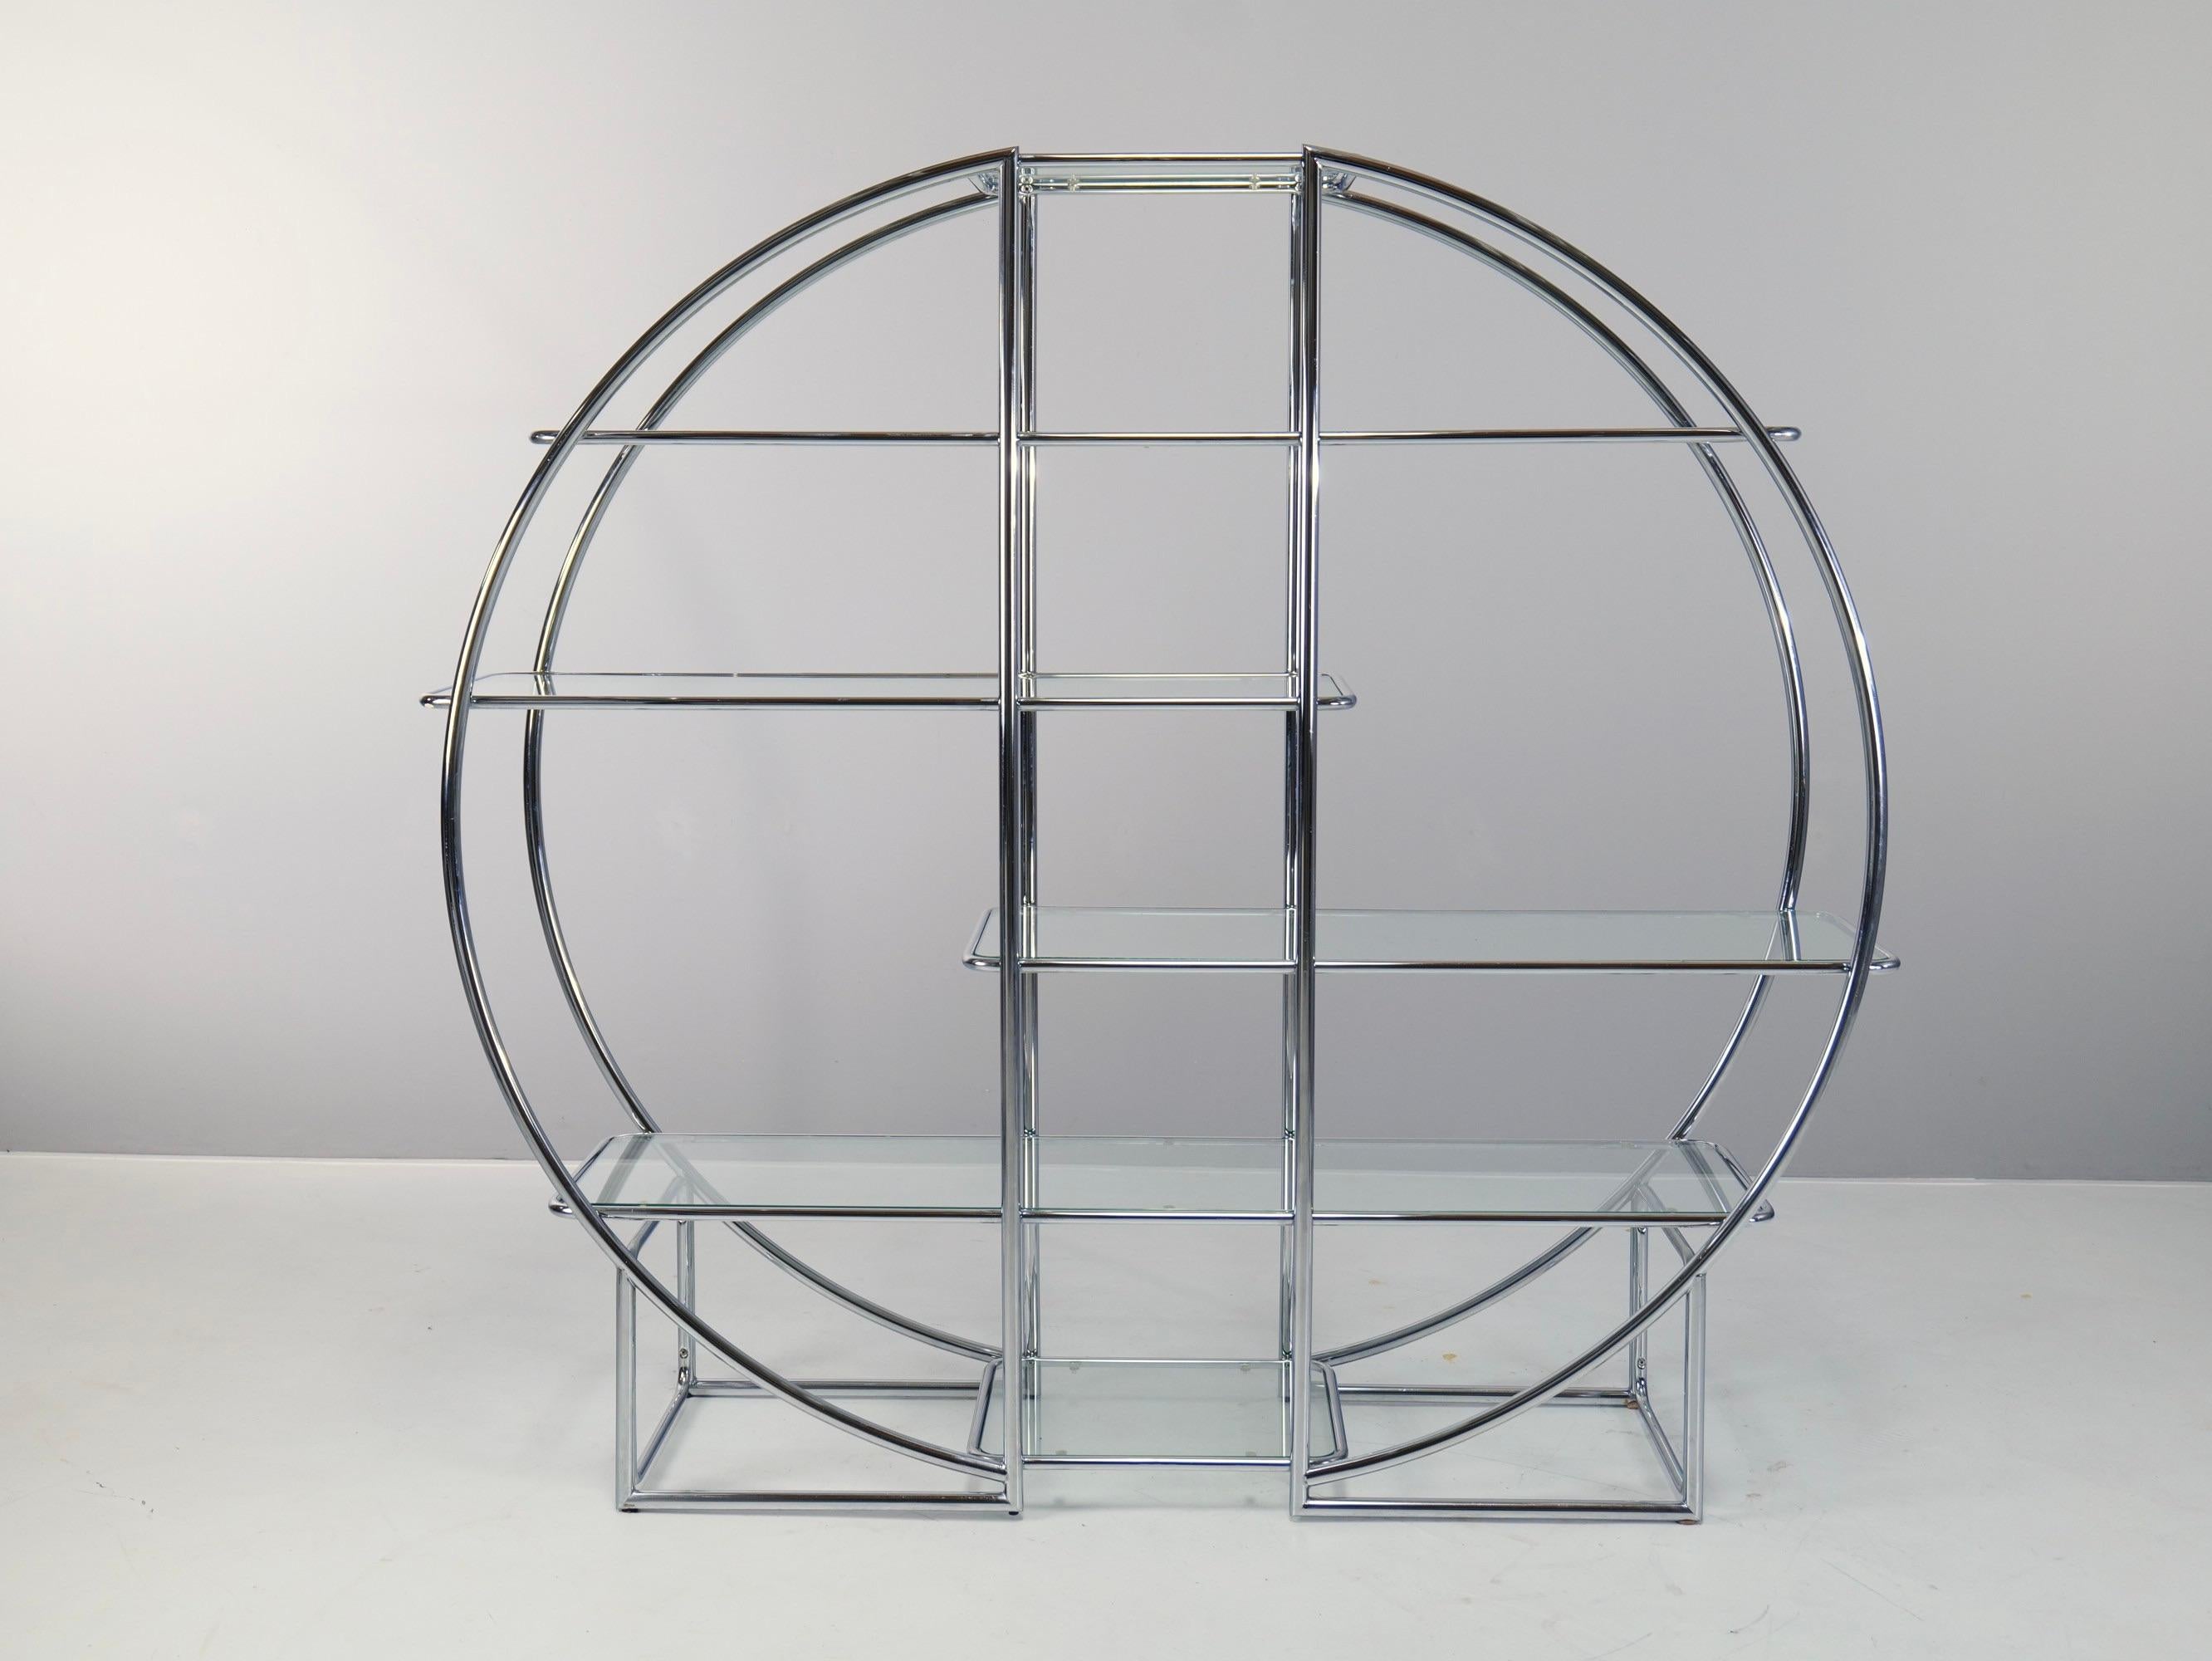 Bauhaus / Art Deco Style shelf or roomdivider from the early 1960's from germany.
This product has been only made by german steel manufacturers.

Made in Germany - 1960's
dimensions:
176 cm width
170 cm heigh
45 cm depth
materials:
tubular